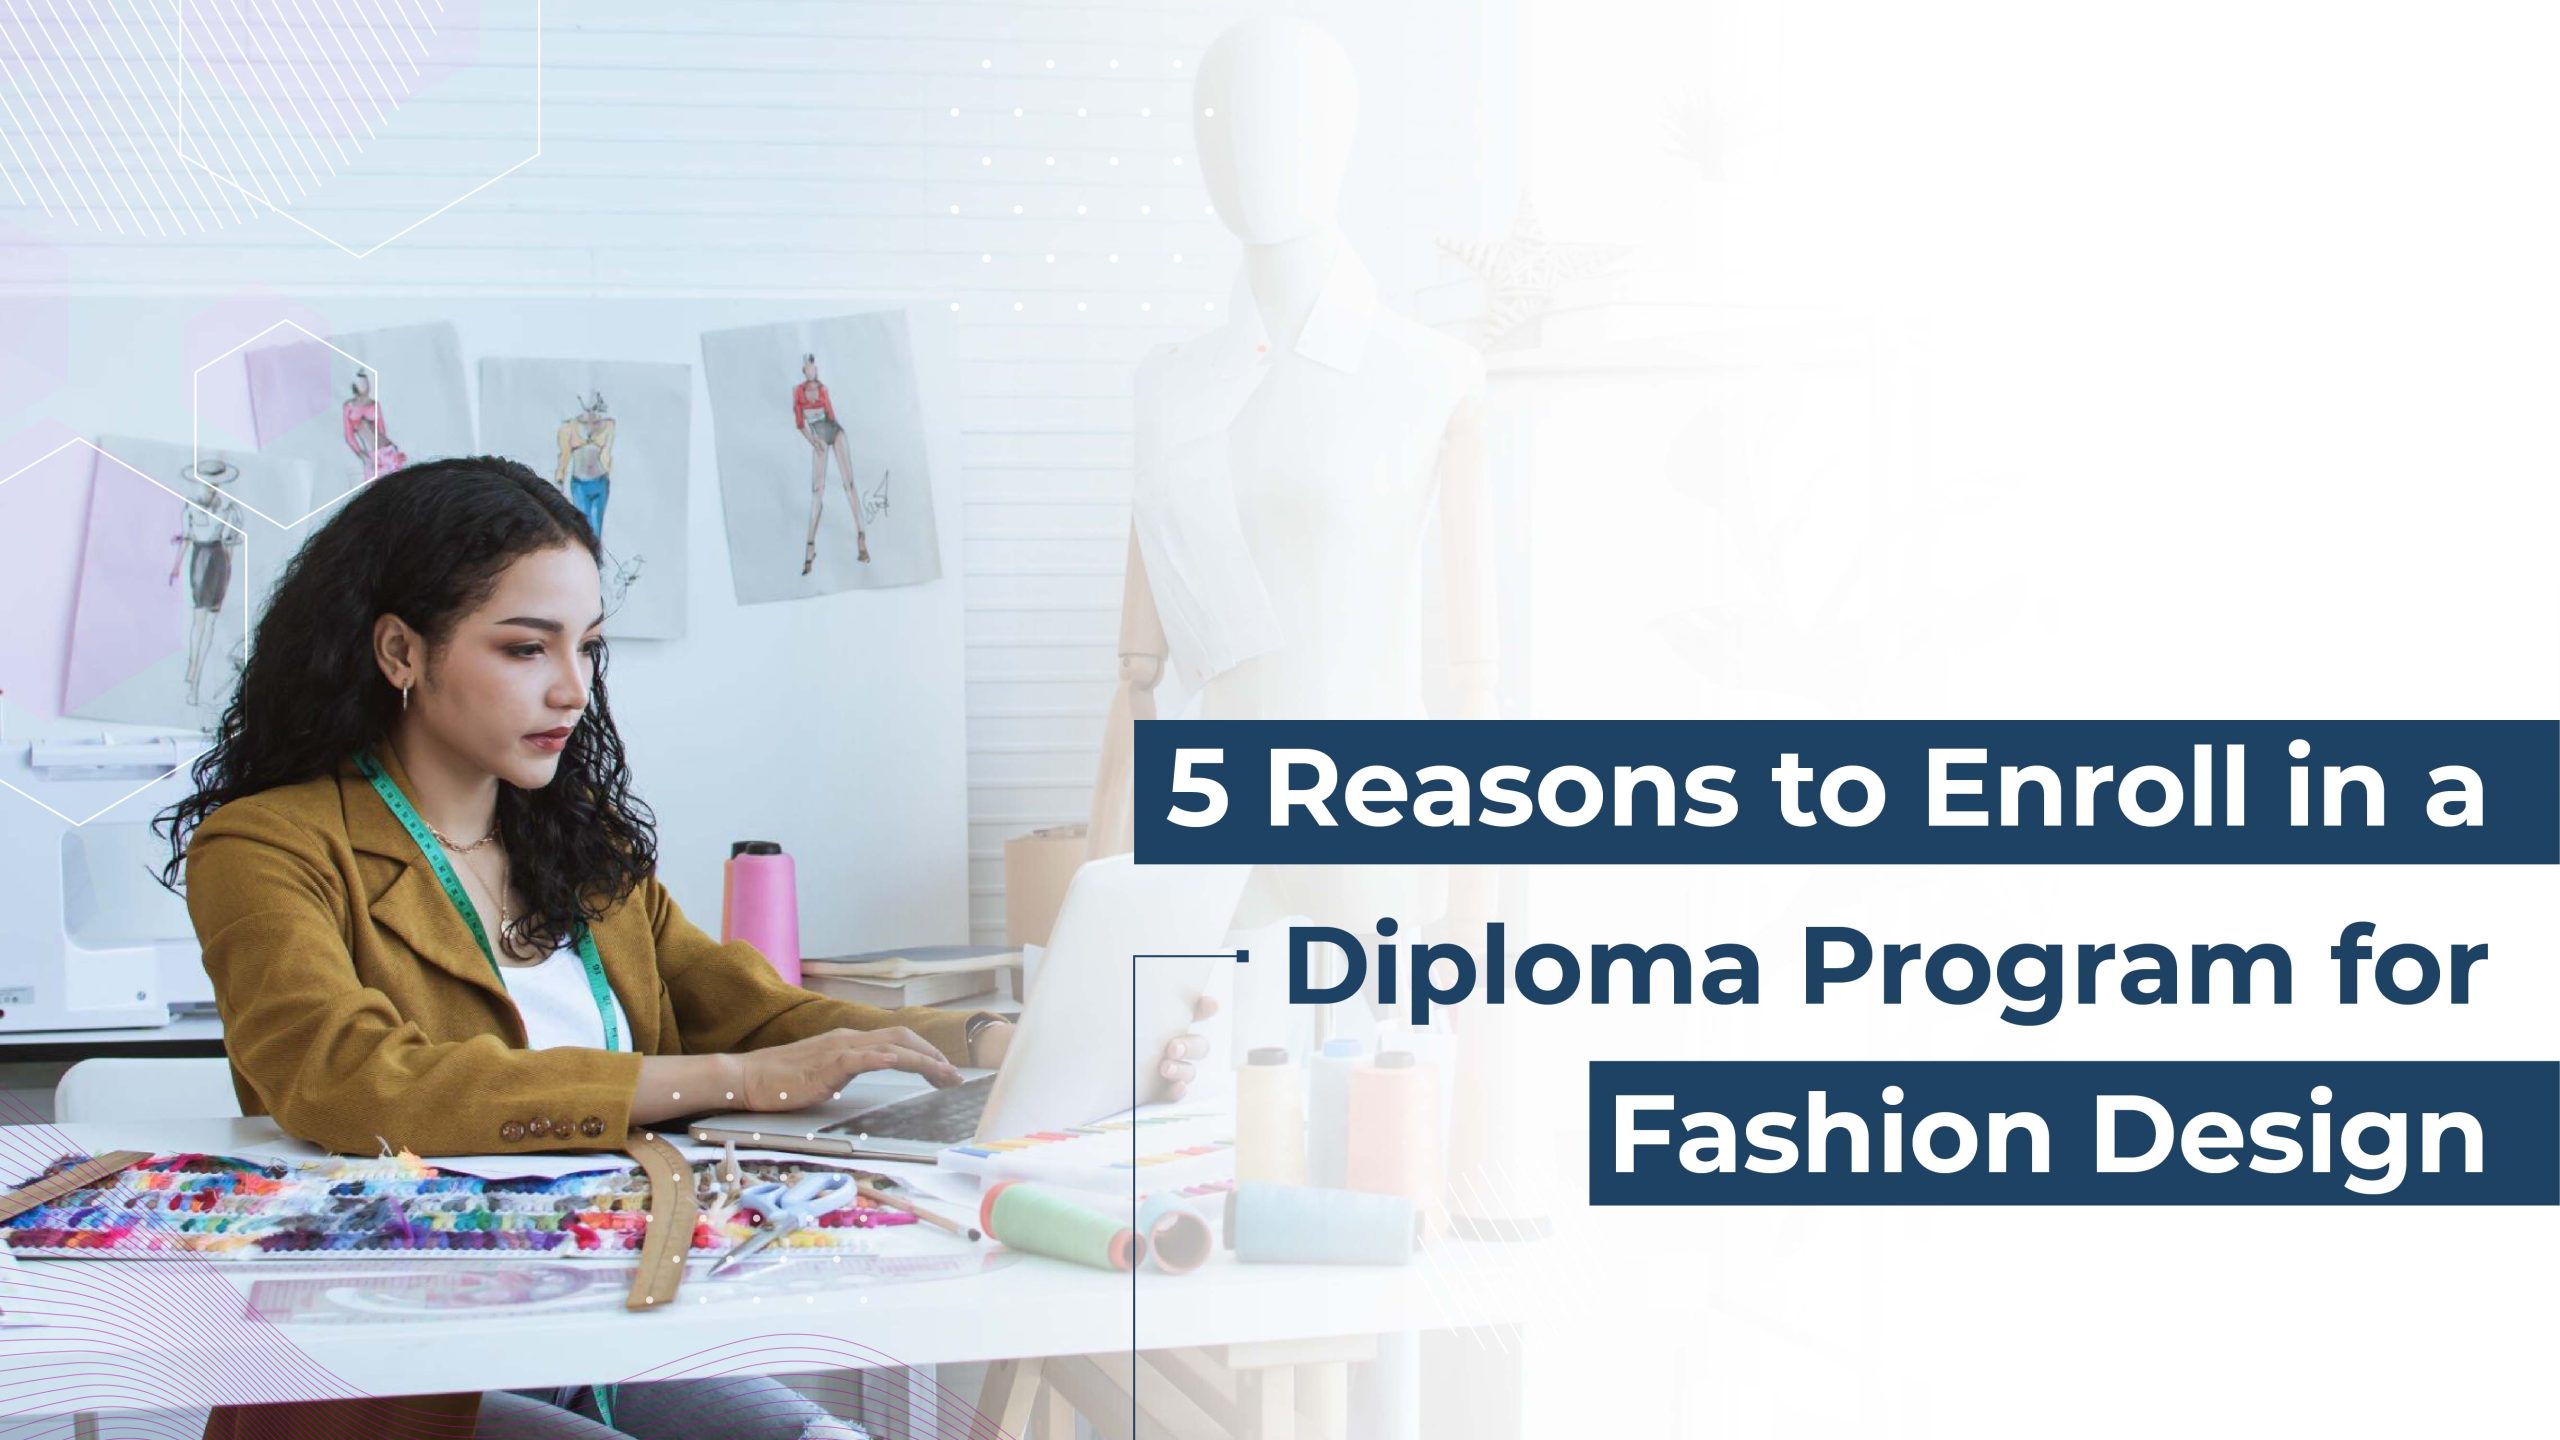 5 Reasons to Enroll in a Diploma Program for Fashion Design